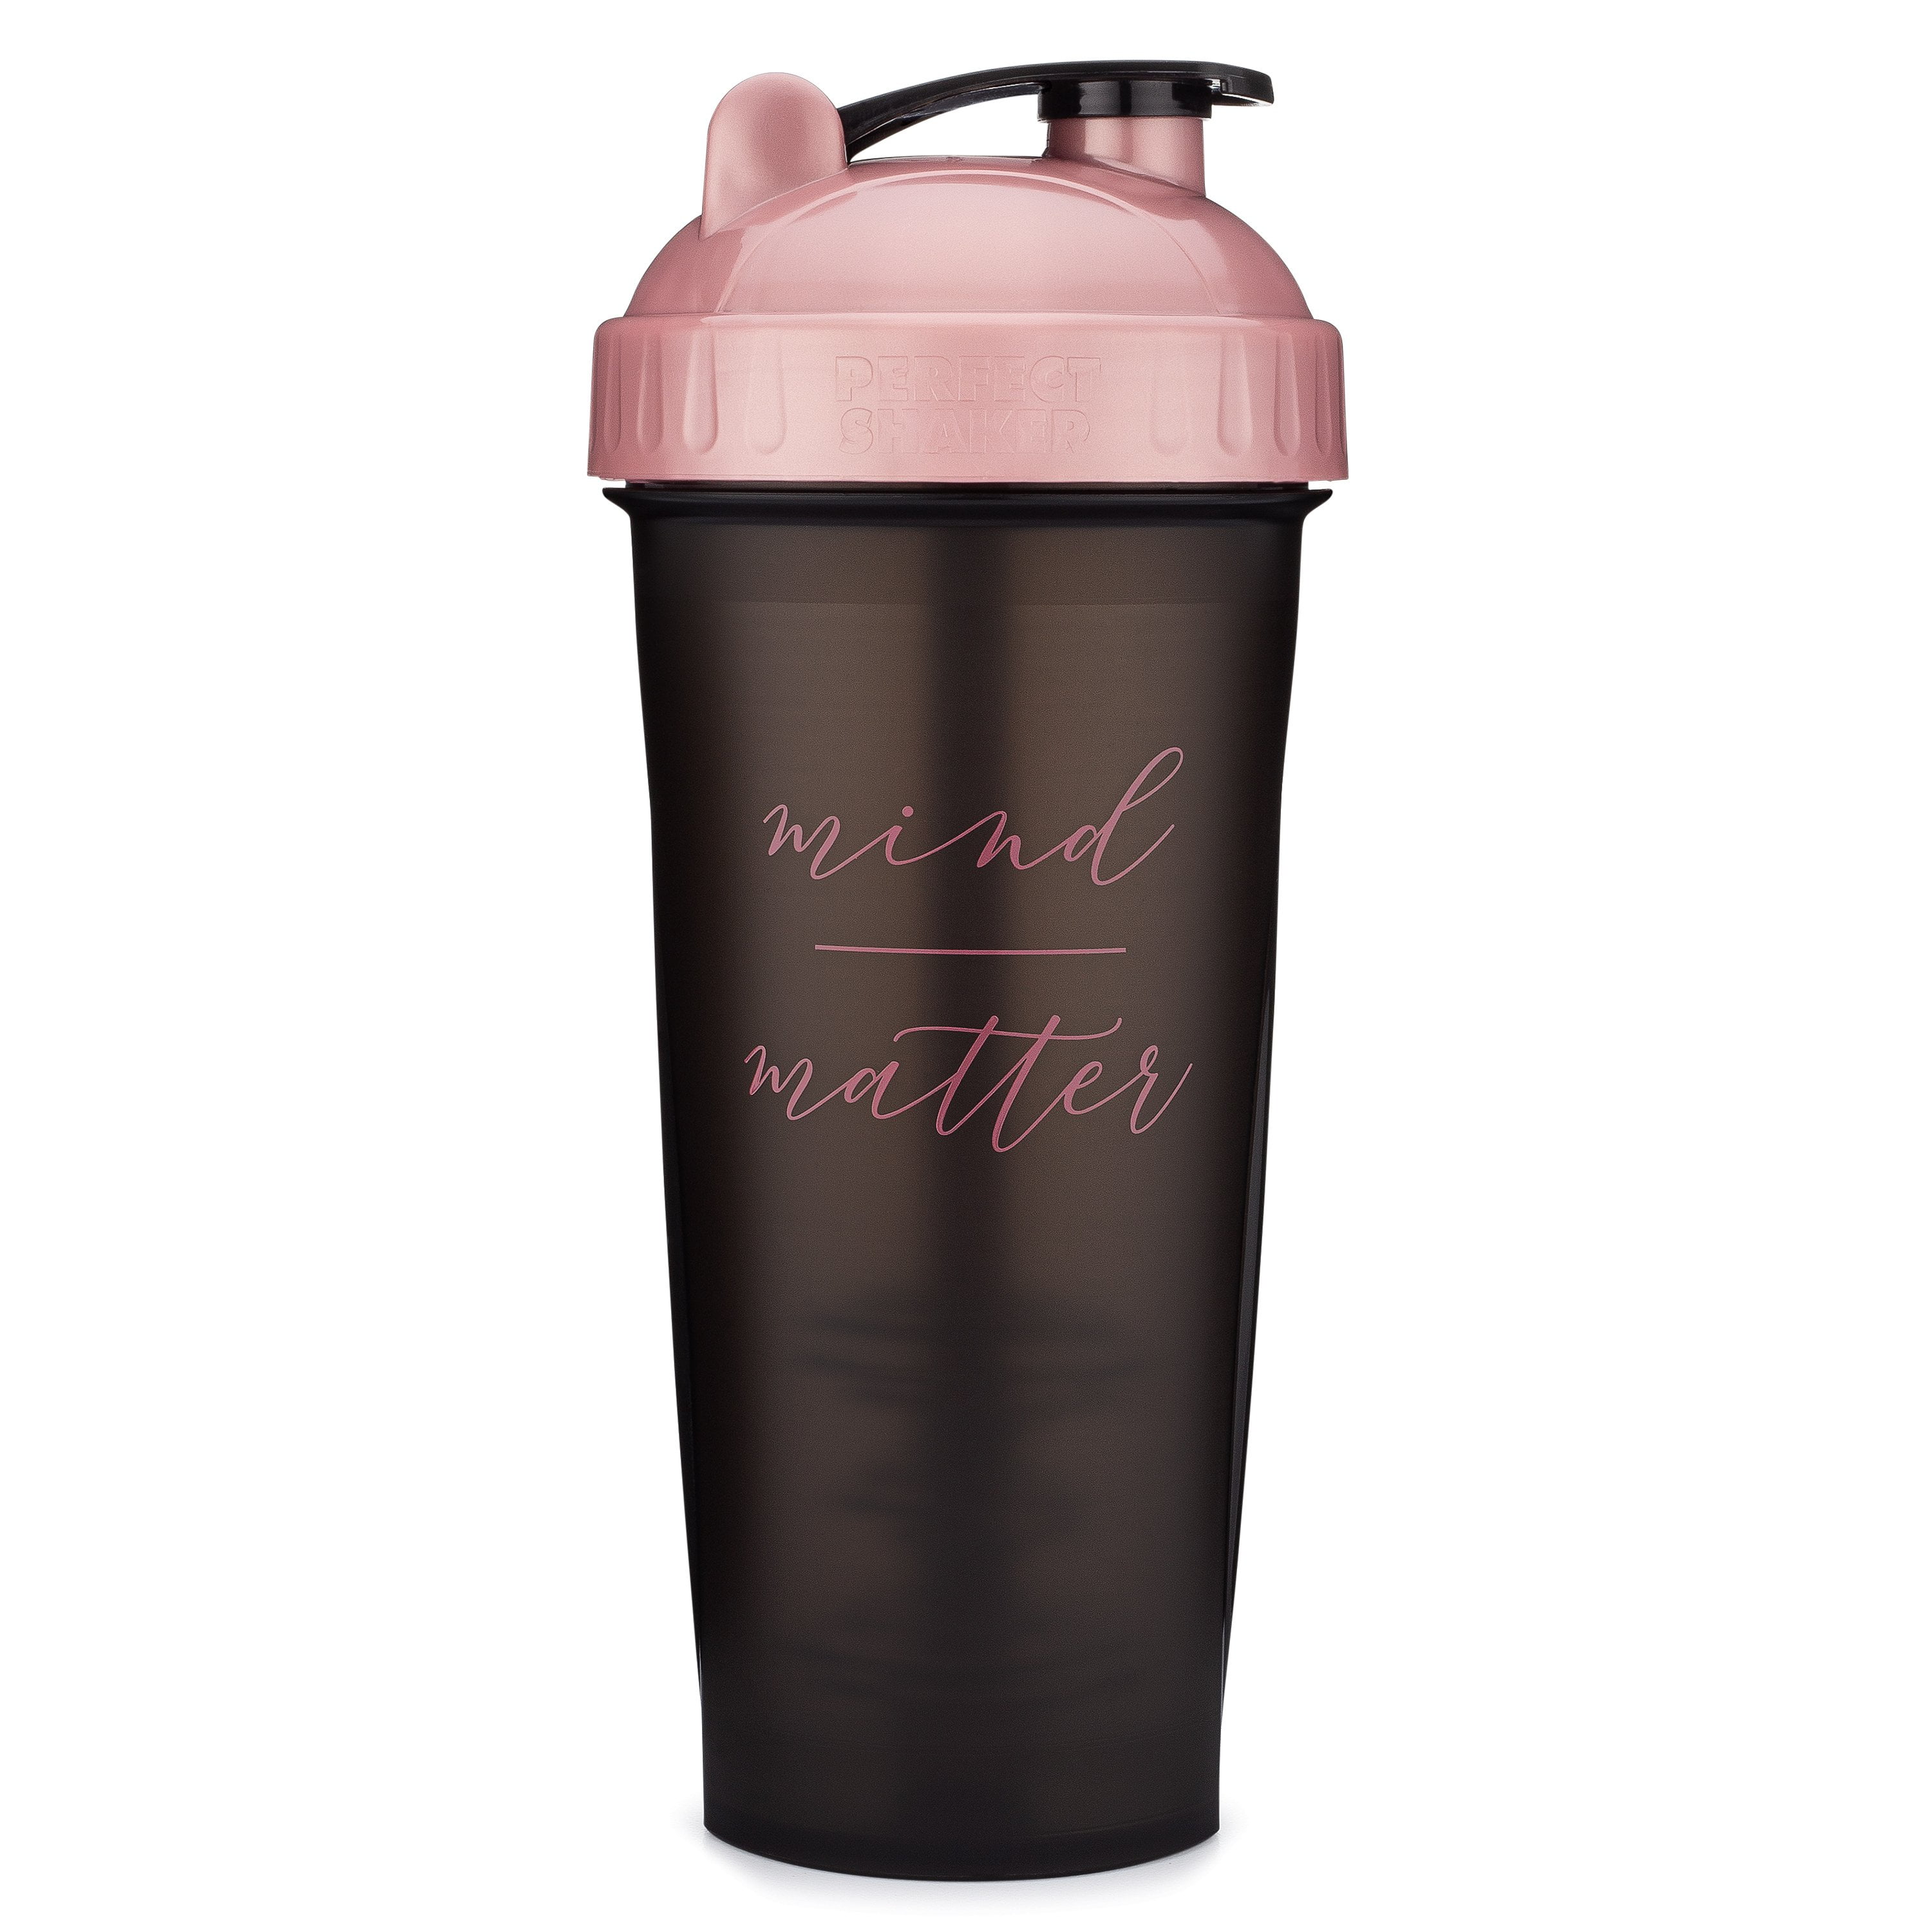 The Bolde Bottle Is Your New Favorite Gym Shaker Bottle - BroBible